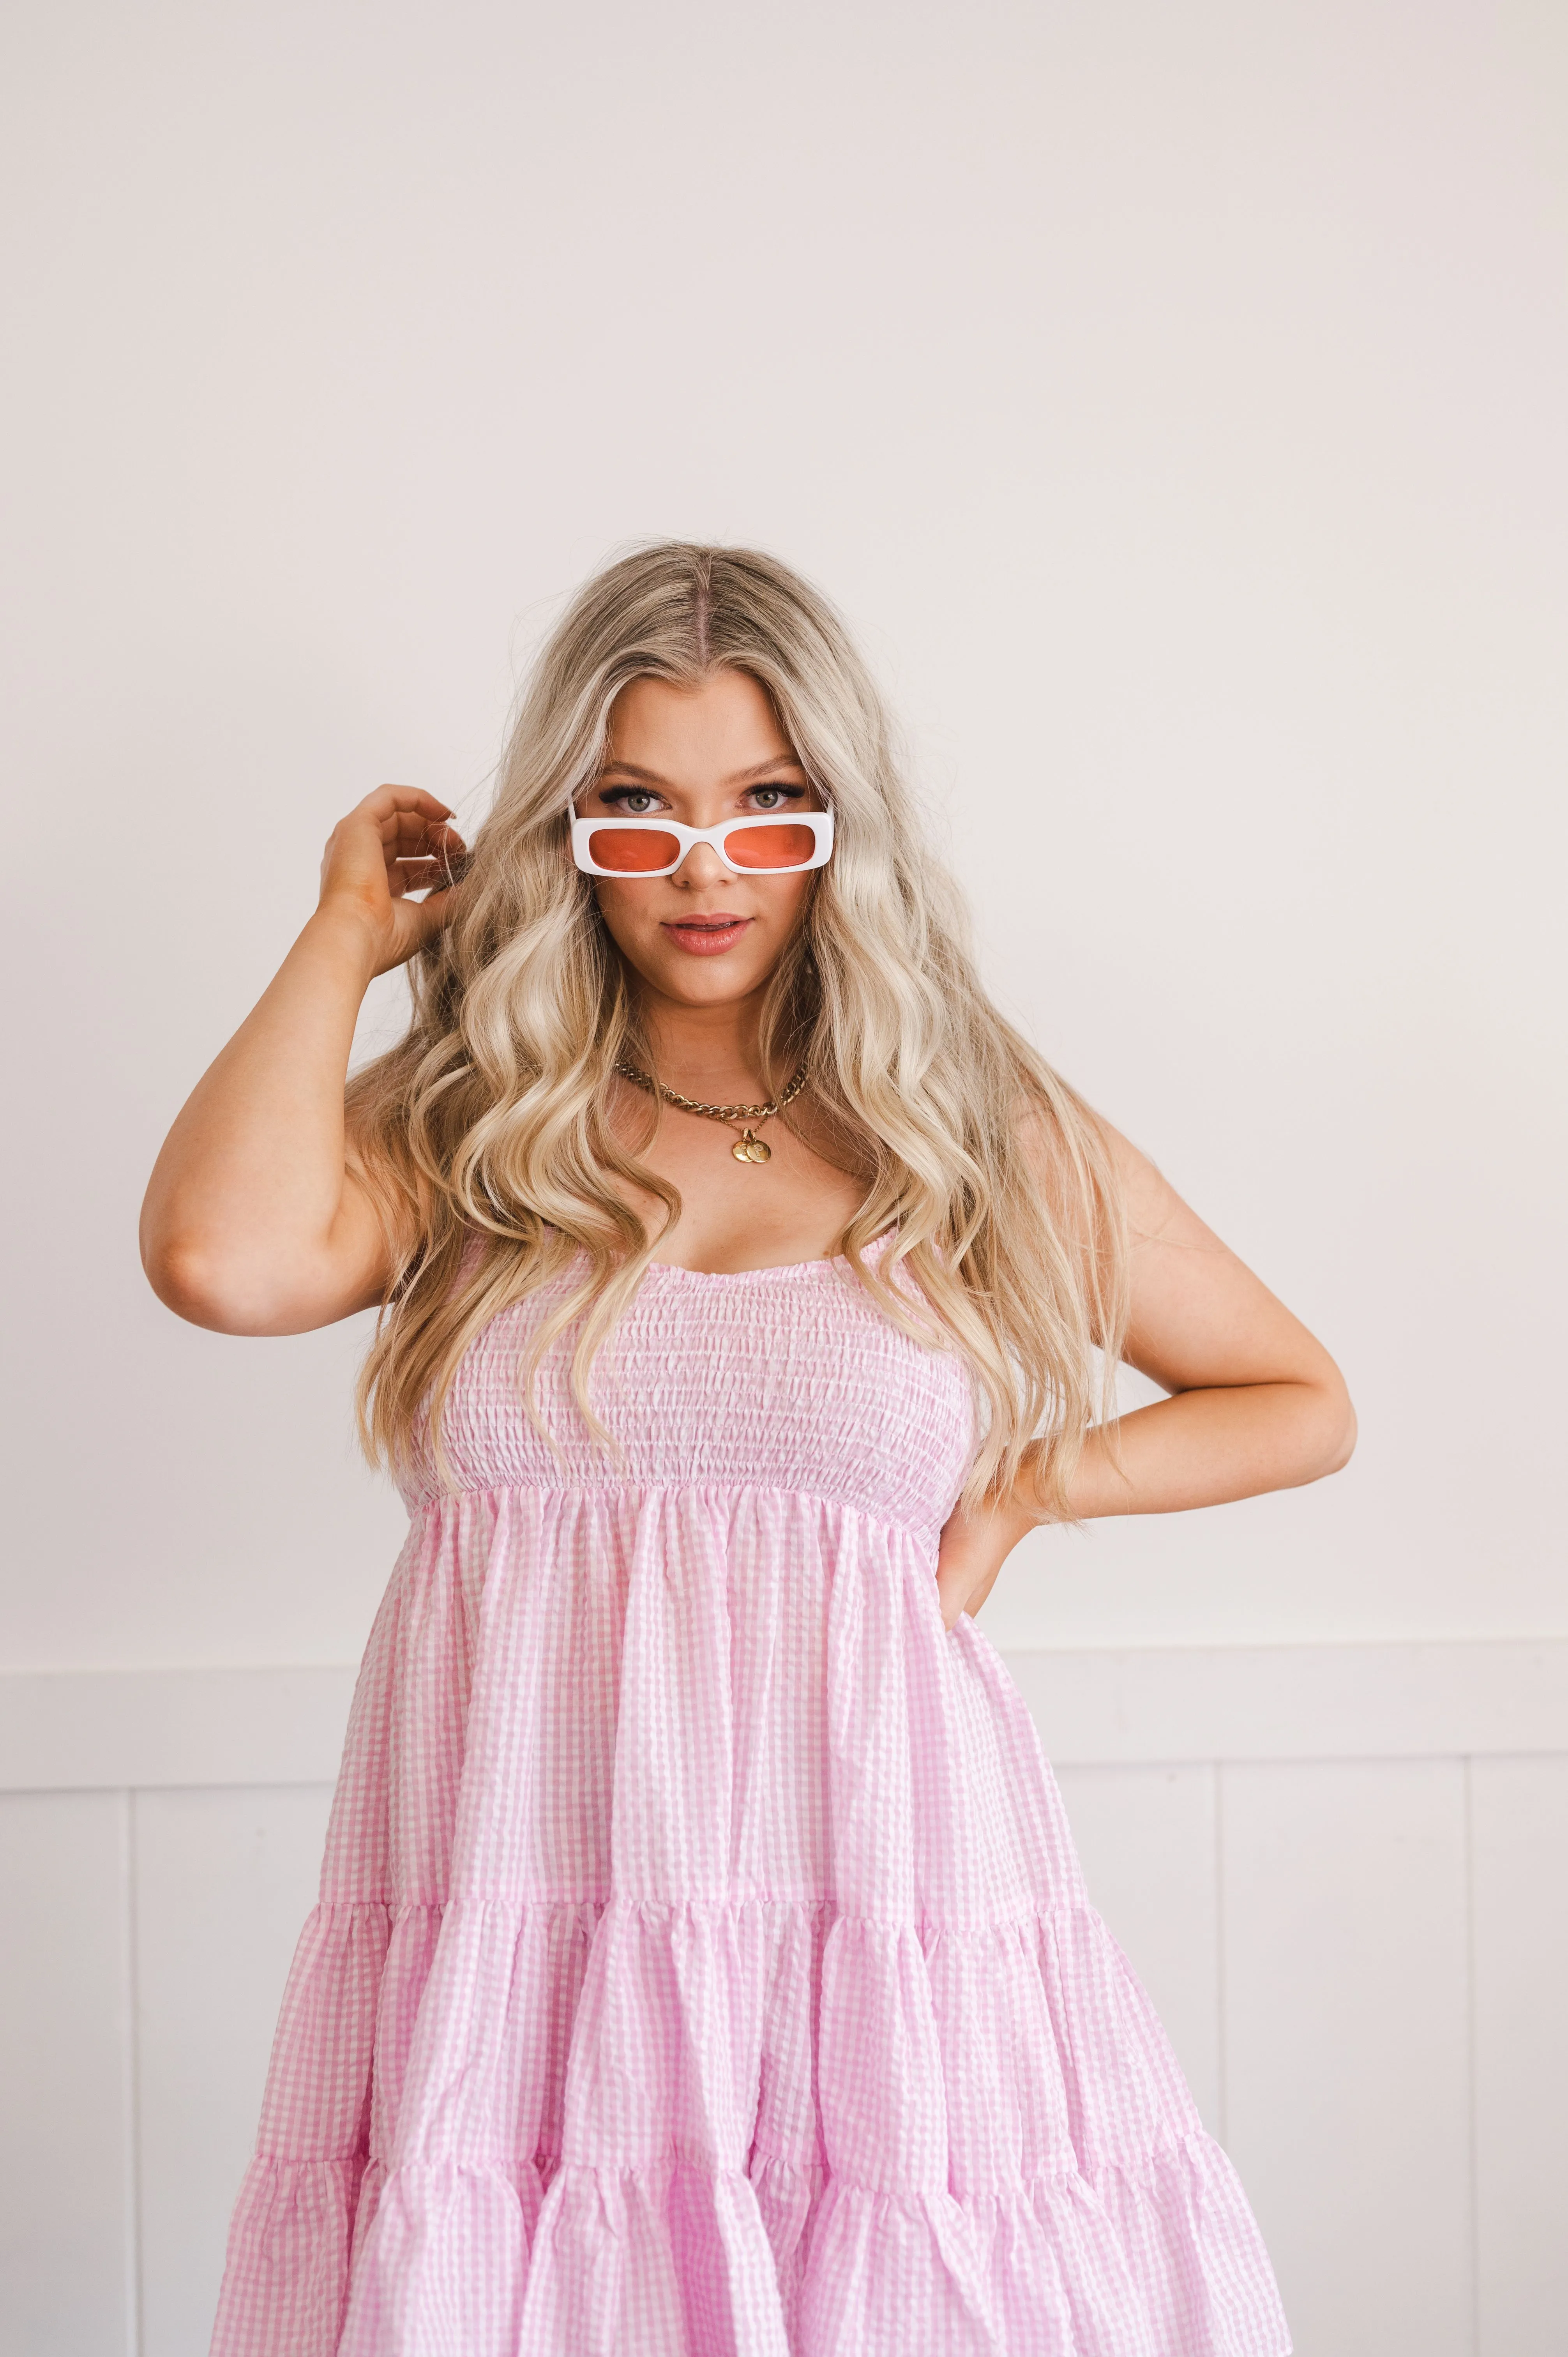 Woman in a pink gingham dress posing with white sunglasses against a light background.